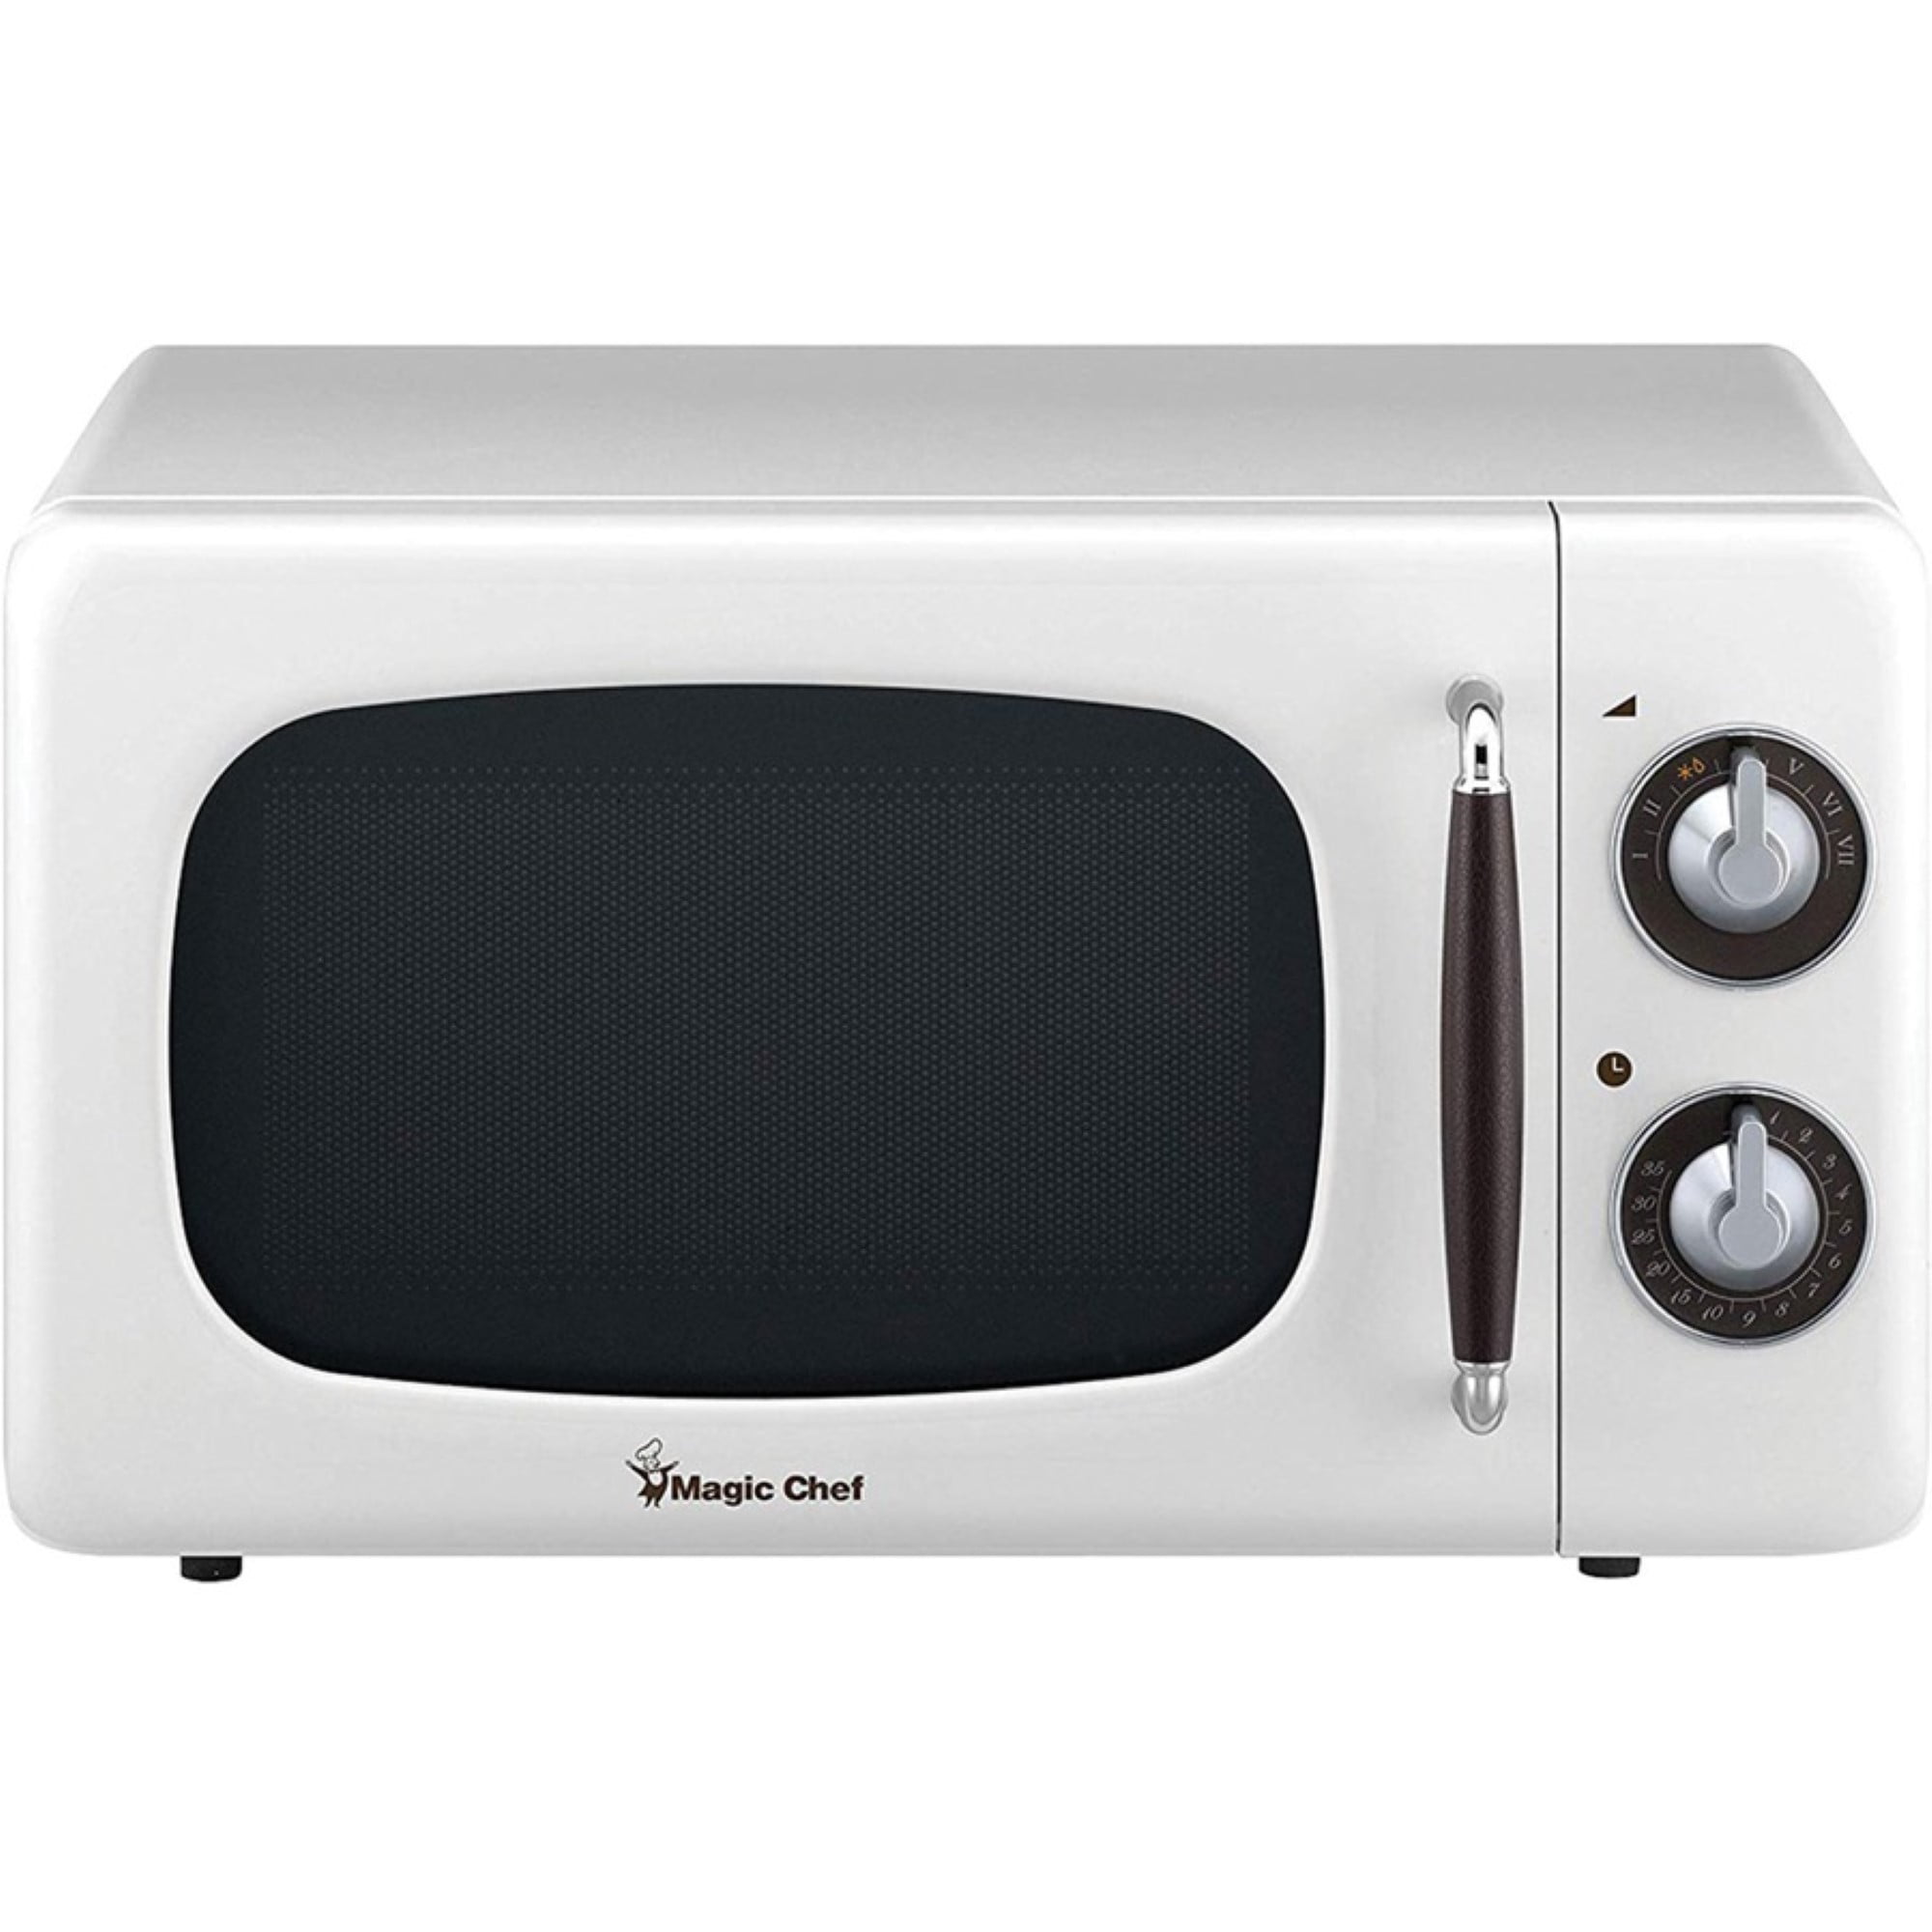 ARLIME Small Retro Microwave Oven, 0.7Cu.ft, 700-Watt with 5 Micro Power  Defrost & Auto Cooking Function, LED Display, Easy Clean Interior,  Stainless